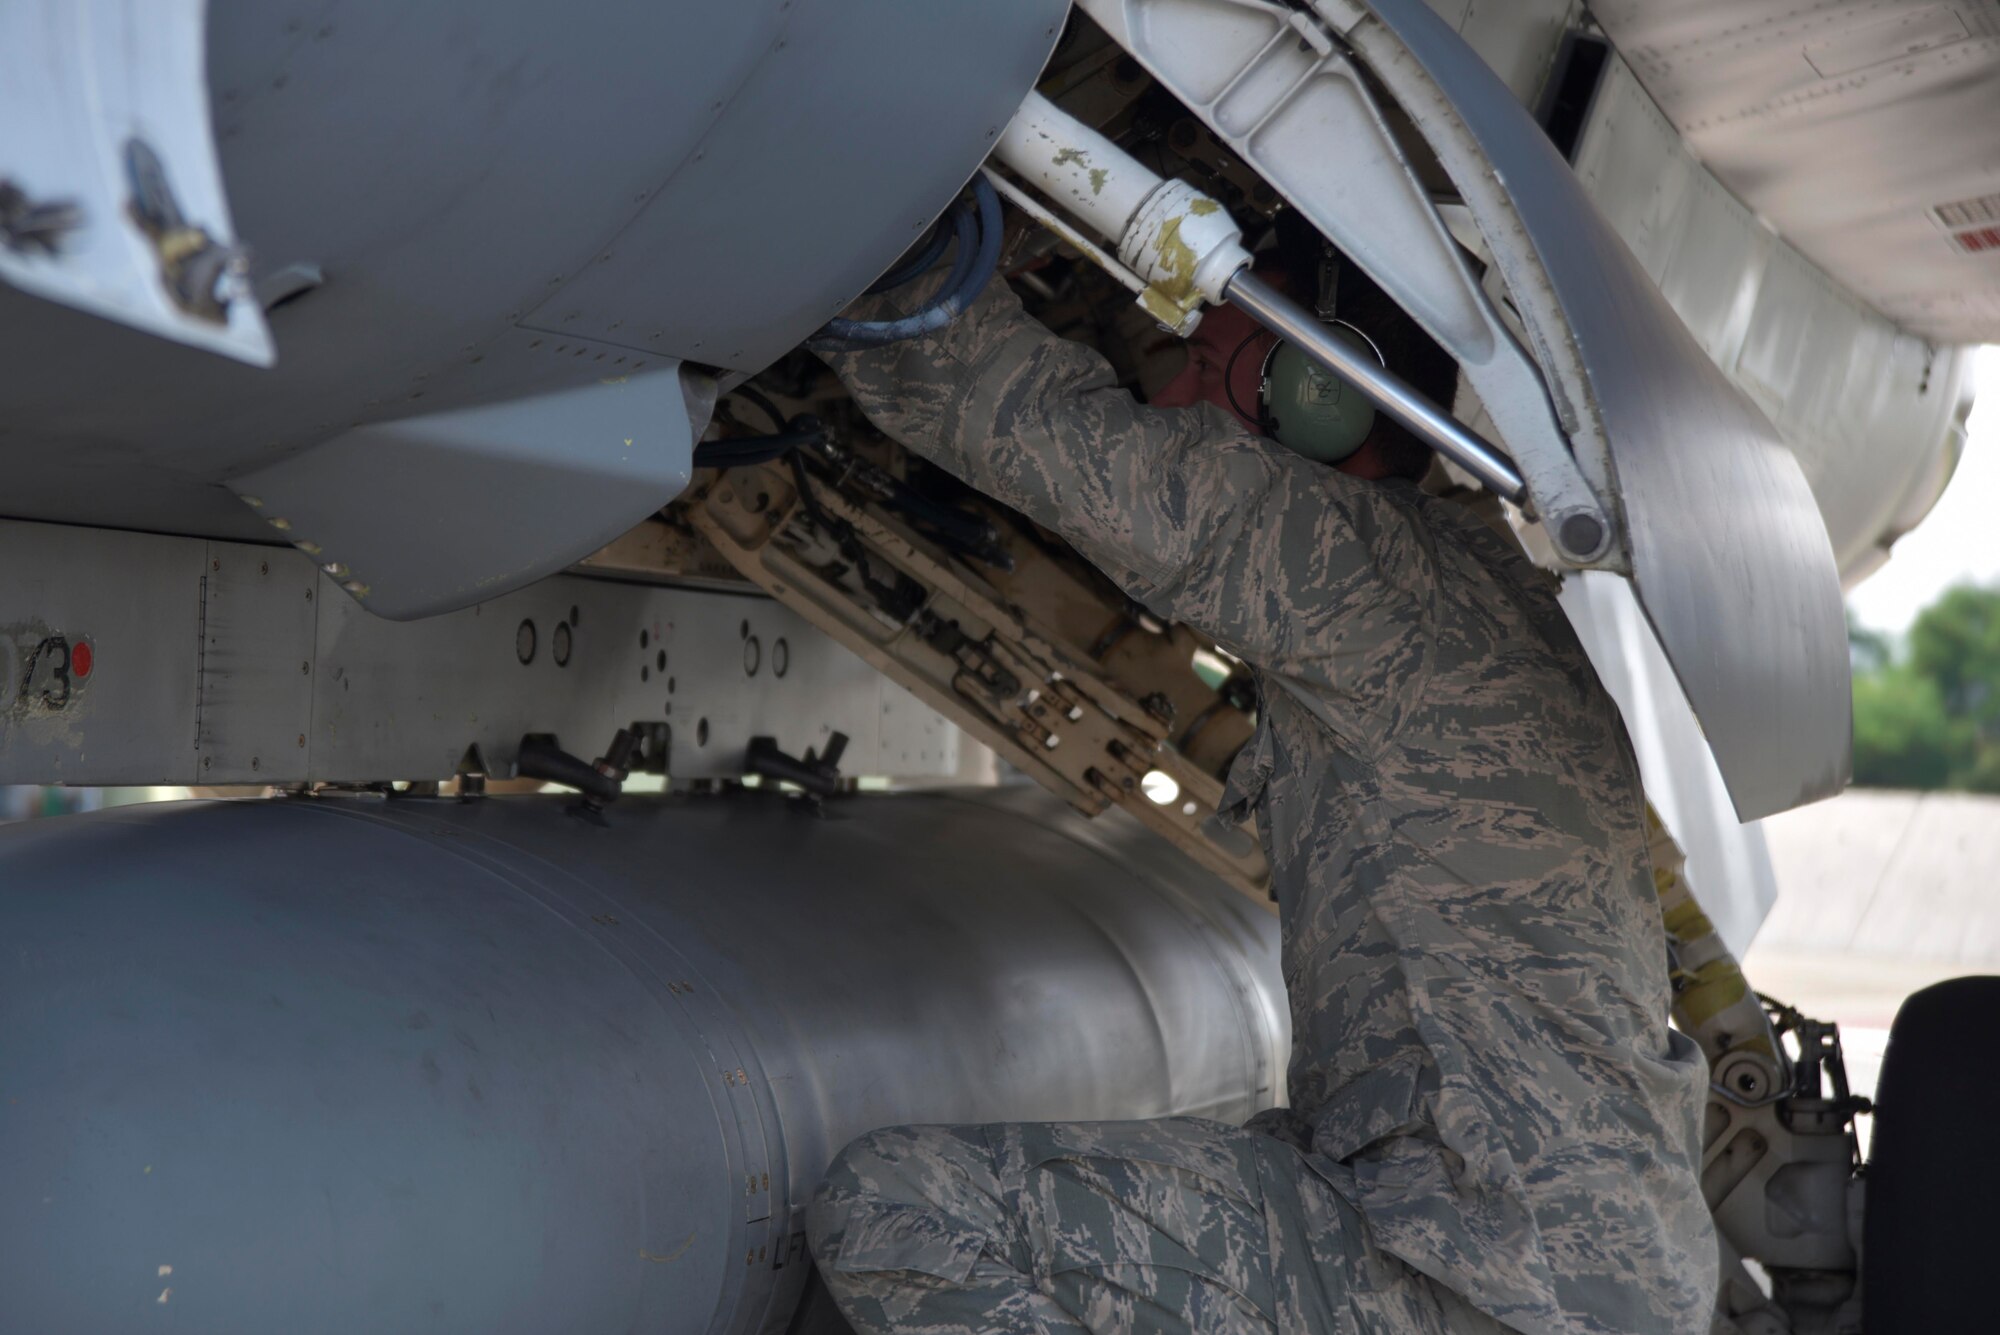 U.S. Air Force Senior Airman Daniel Charles, 35th Aircraft Maintenance Squadron aircraft electrical and environmental systems journeyman, performs an operations check on an F-16 Fighting Falcon at Misawa Air Base, Japan, Sept. 1, 2015. Charles must inspect the electrical systems on an aircraft and give the go-ahead for flight during aircraft launches. (U.S. Air Force photo by Senior Airman Jose L. Hernandez-Domitilo)